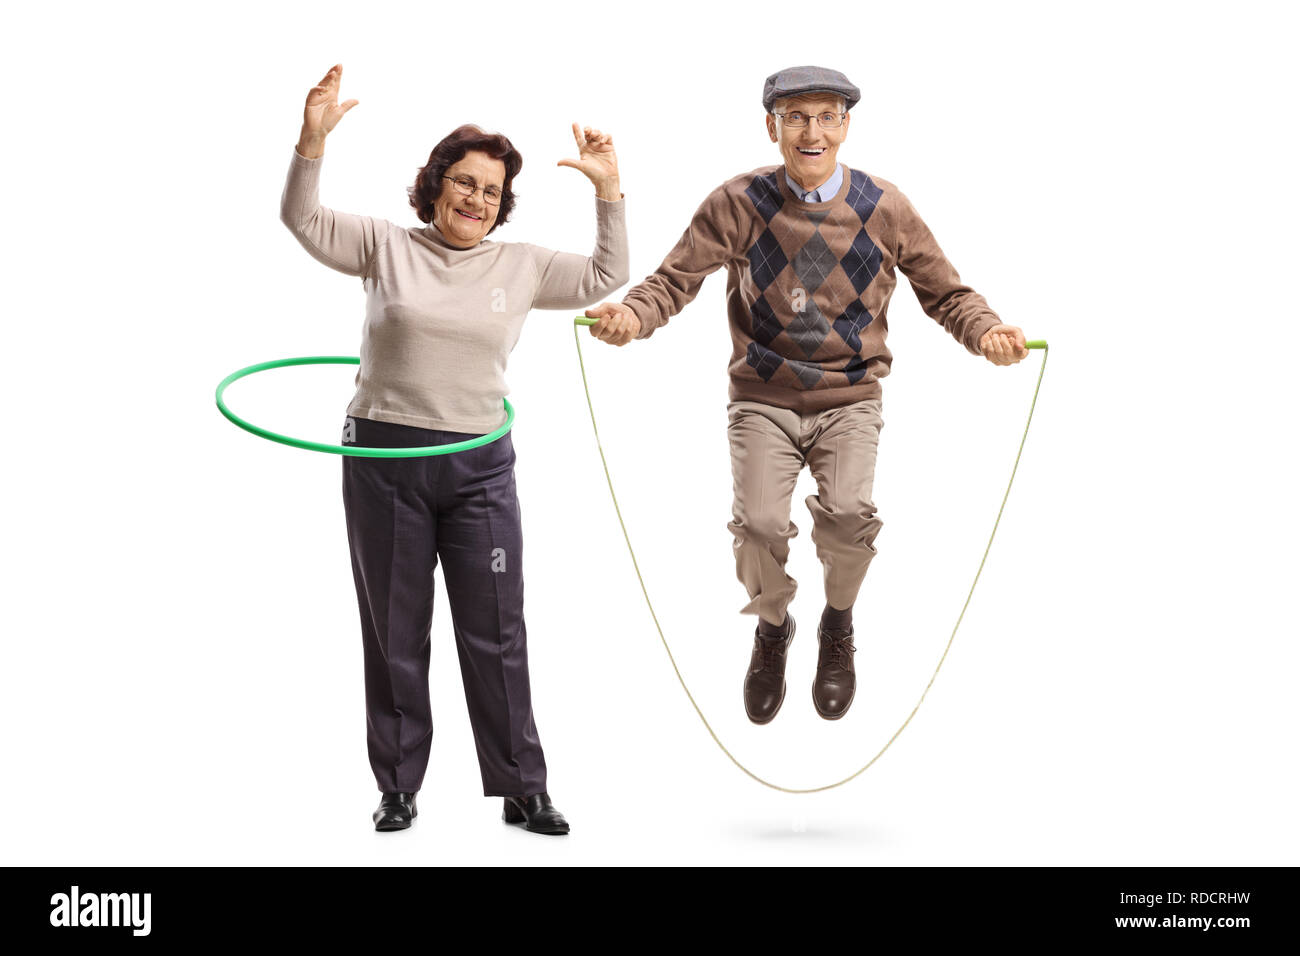 Full length portrait of an elderly woman with a hula hoop and a senior man jumping with a skipping rope isolated on white background Stock Photo